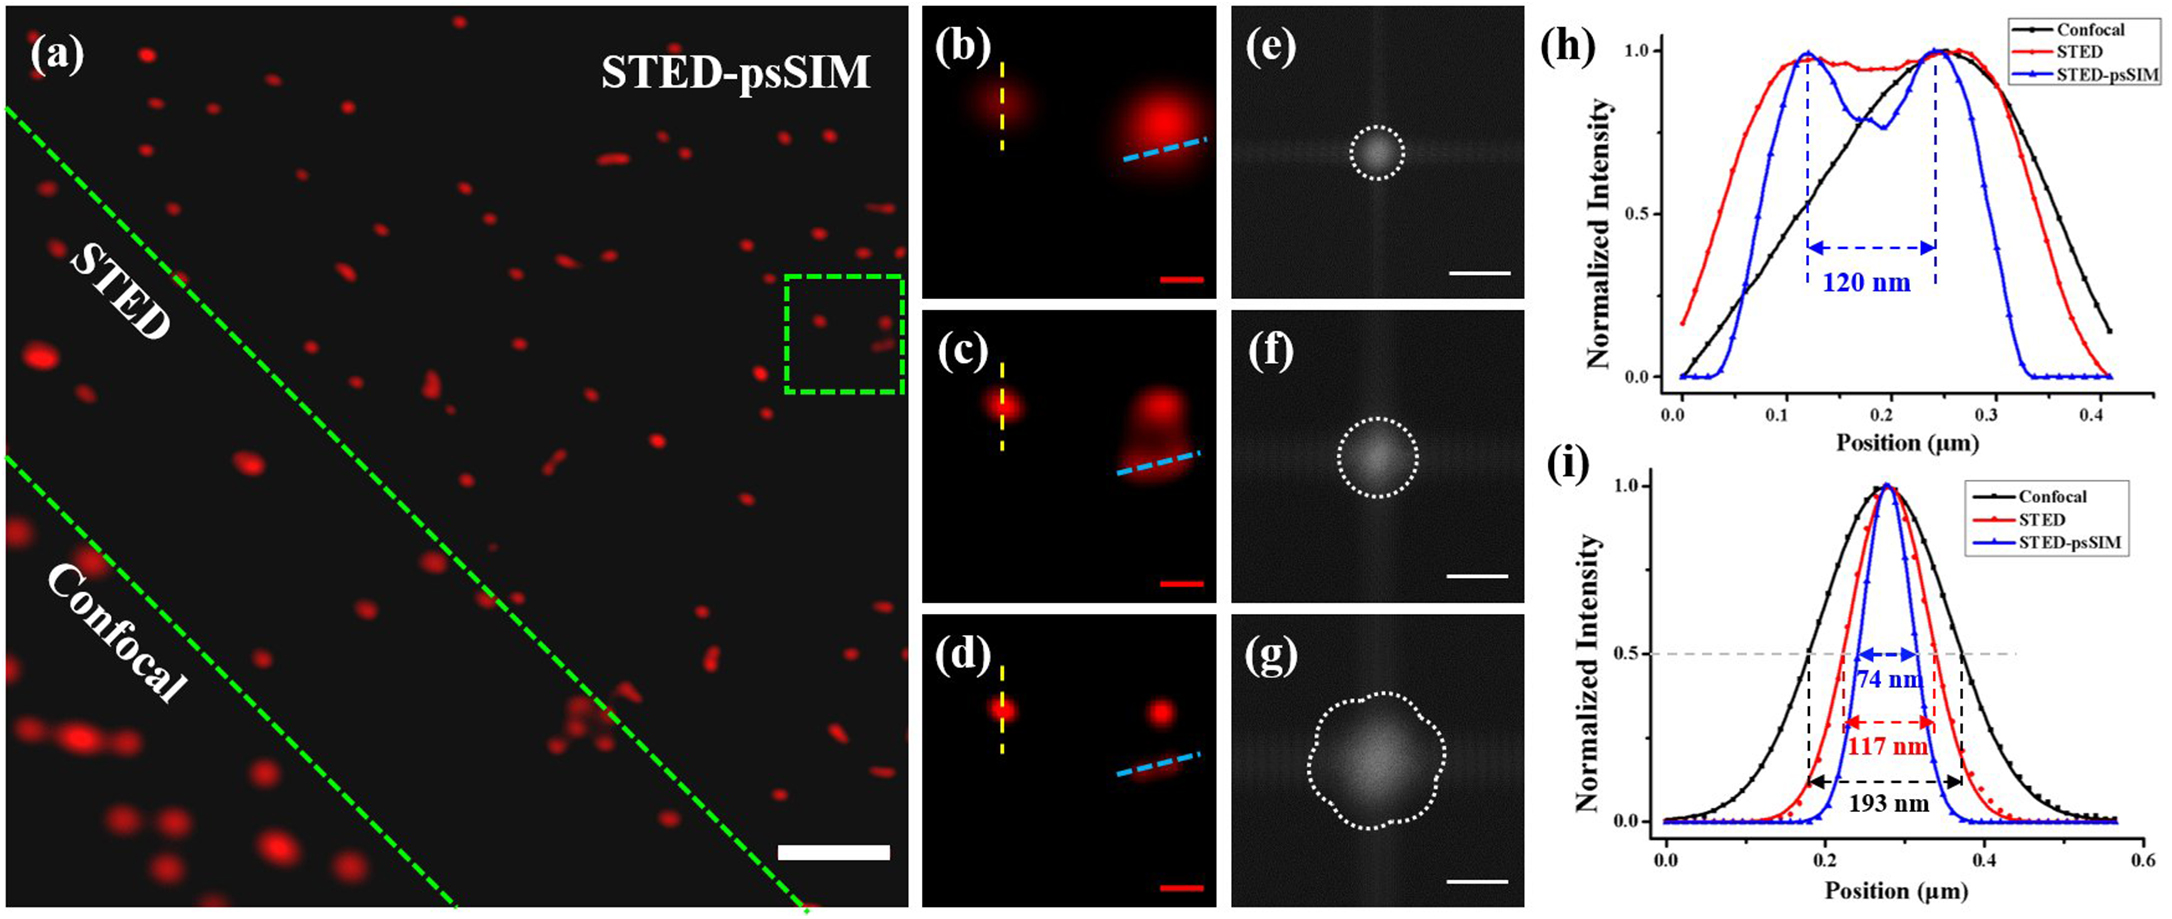 Comparison of imaging resolutions of confocal microscopy, STED microscopy, and STED-psSIM. (a) Images of 23 nm fluorescent beads captured by the confocal microscopy (lower left), STED microscopy (middle), and STED-psSIM (upper right) separated by a dashed green line; (b)–(d) magnified view of the area encircled by the green dashed box in (a): (b) confocal microscopy, (c) STED microscopy, and (d) STED-psSIM[28]; (e)–(g) observable spatial frequency regions obtained by Fourier transforming images in (b)–(d); (h), (i) normalized intensity profiles of fluorescence beads along the (h) blue and (i) yellow dashed lines in (b)–(d), respectively. The profiles show average FWHMs of 193, 117, and 74 nm. Scale bars, 1 µm in (a) and 0.2 µm in (b)–(d).